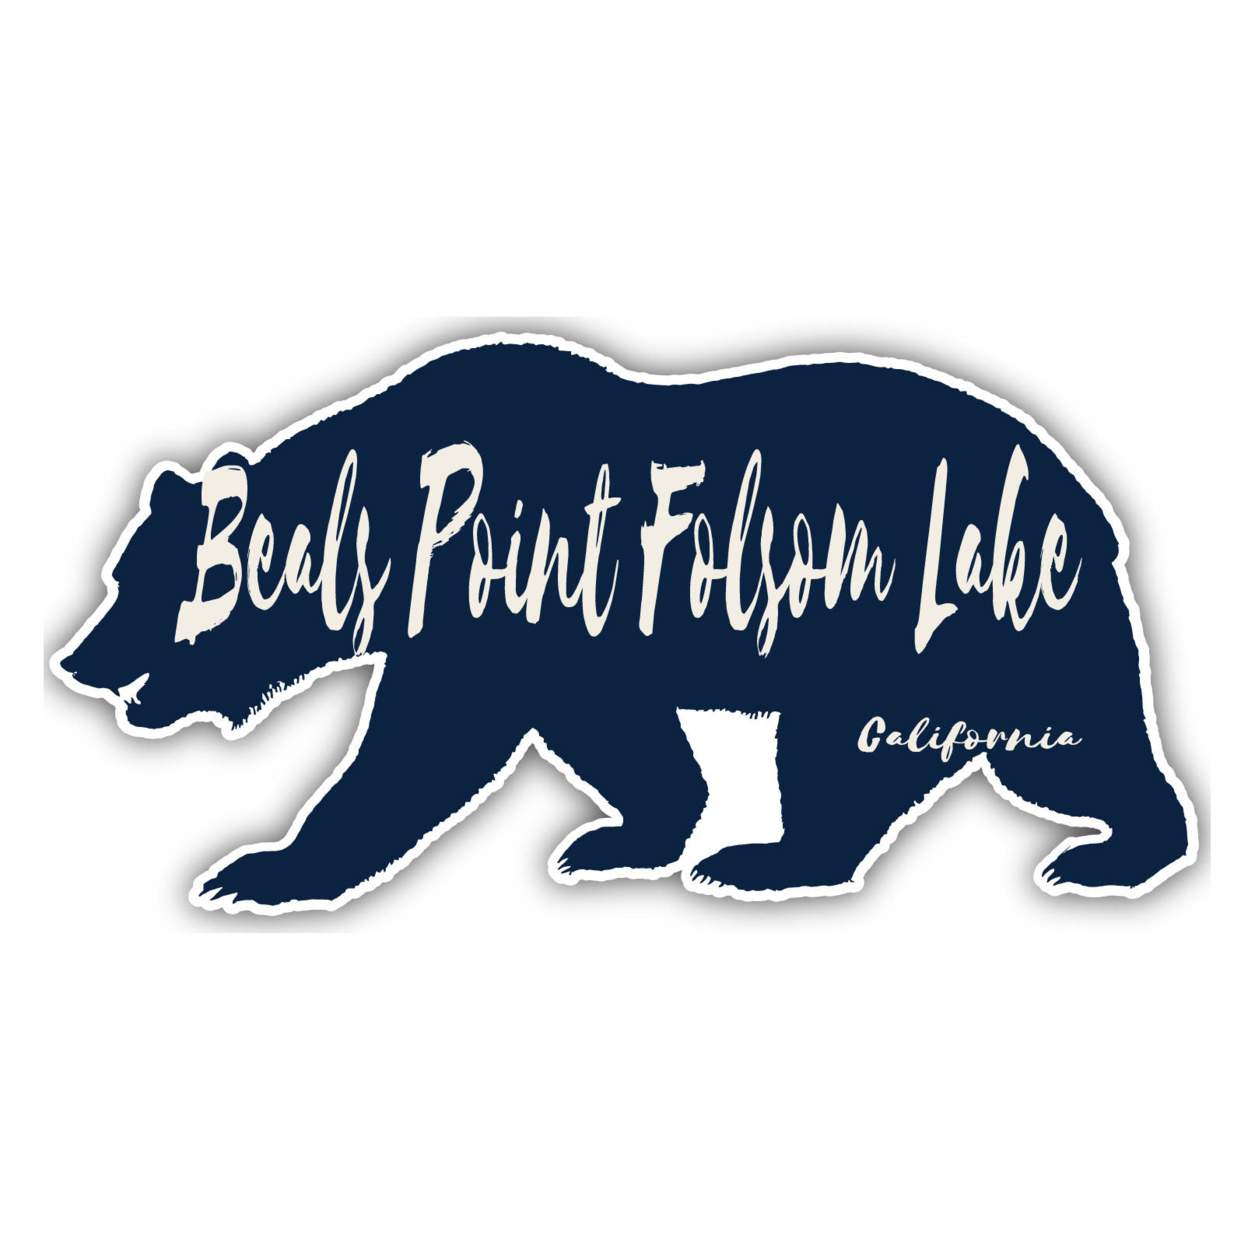 Beals Point Folsom Lake California Souvenir Decorative Stickers (Choose Theme And Size) - 4-Pack, 10-Inch, Bear